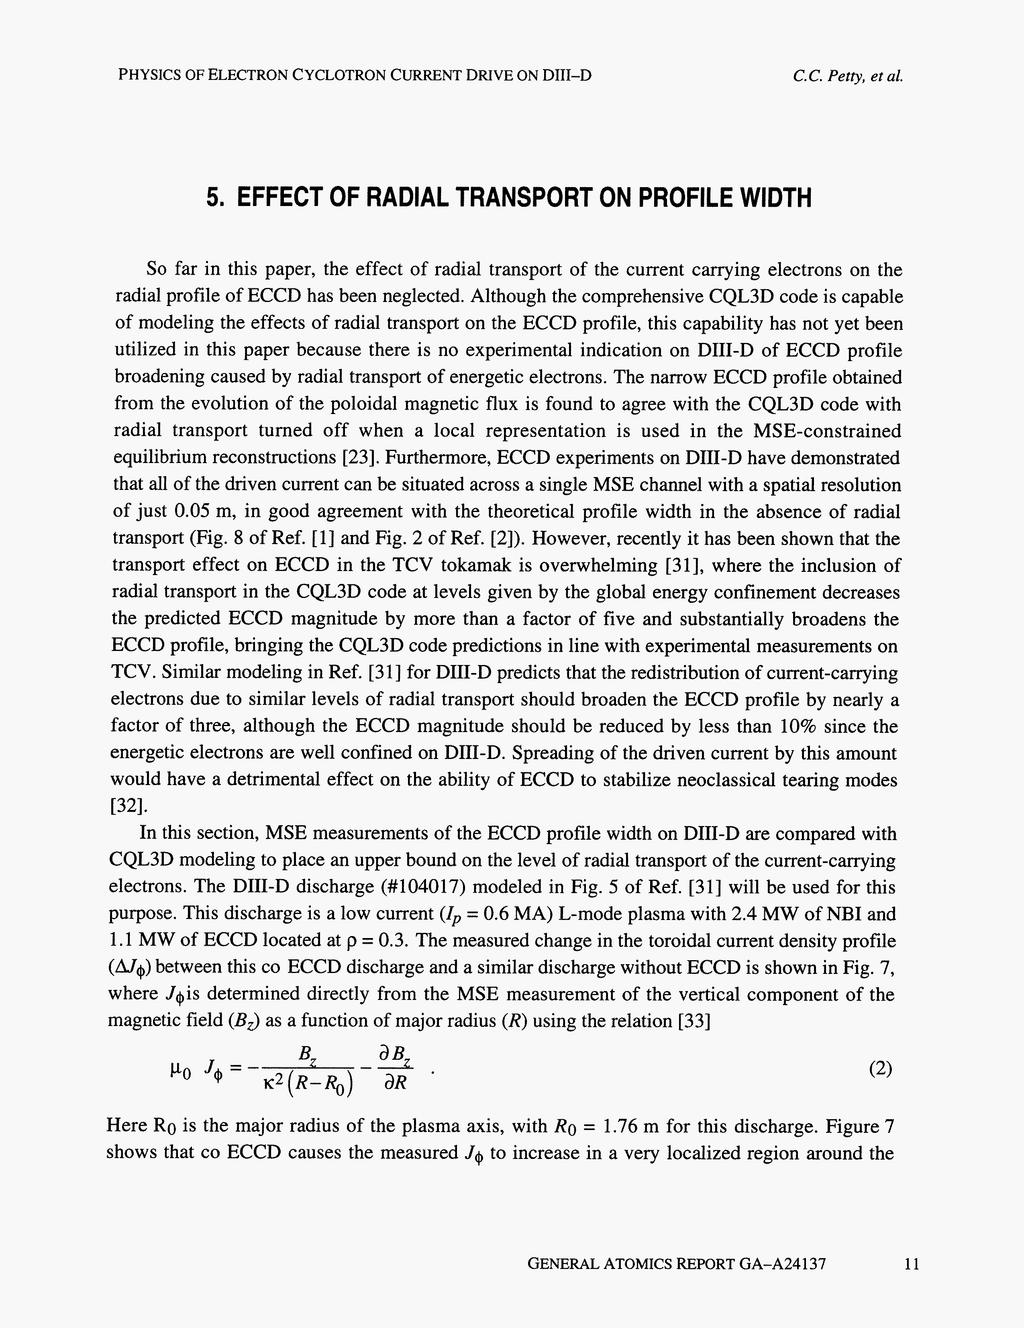 5. EFFECT OF RADAL TRANSPORT ON PROFLE WDTH So far in this paper, the effect of radial transport of the current carrying electrons on the radial profile of ECCD has been neglected.